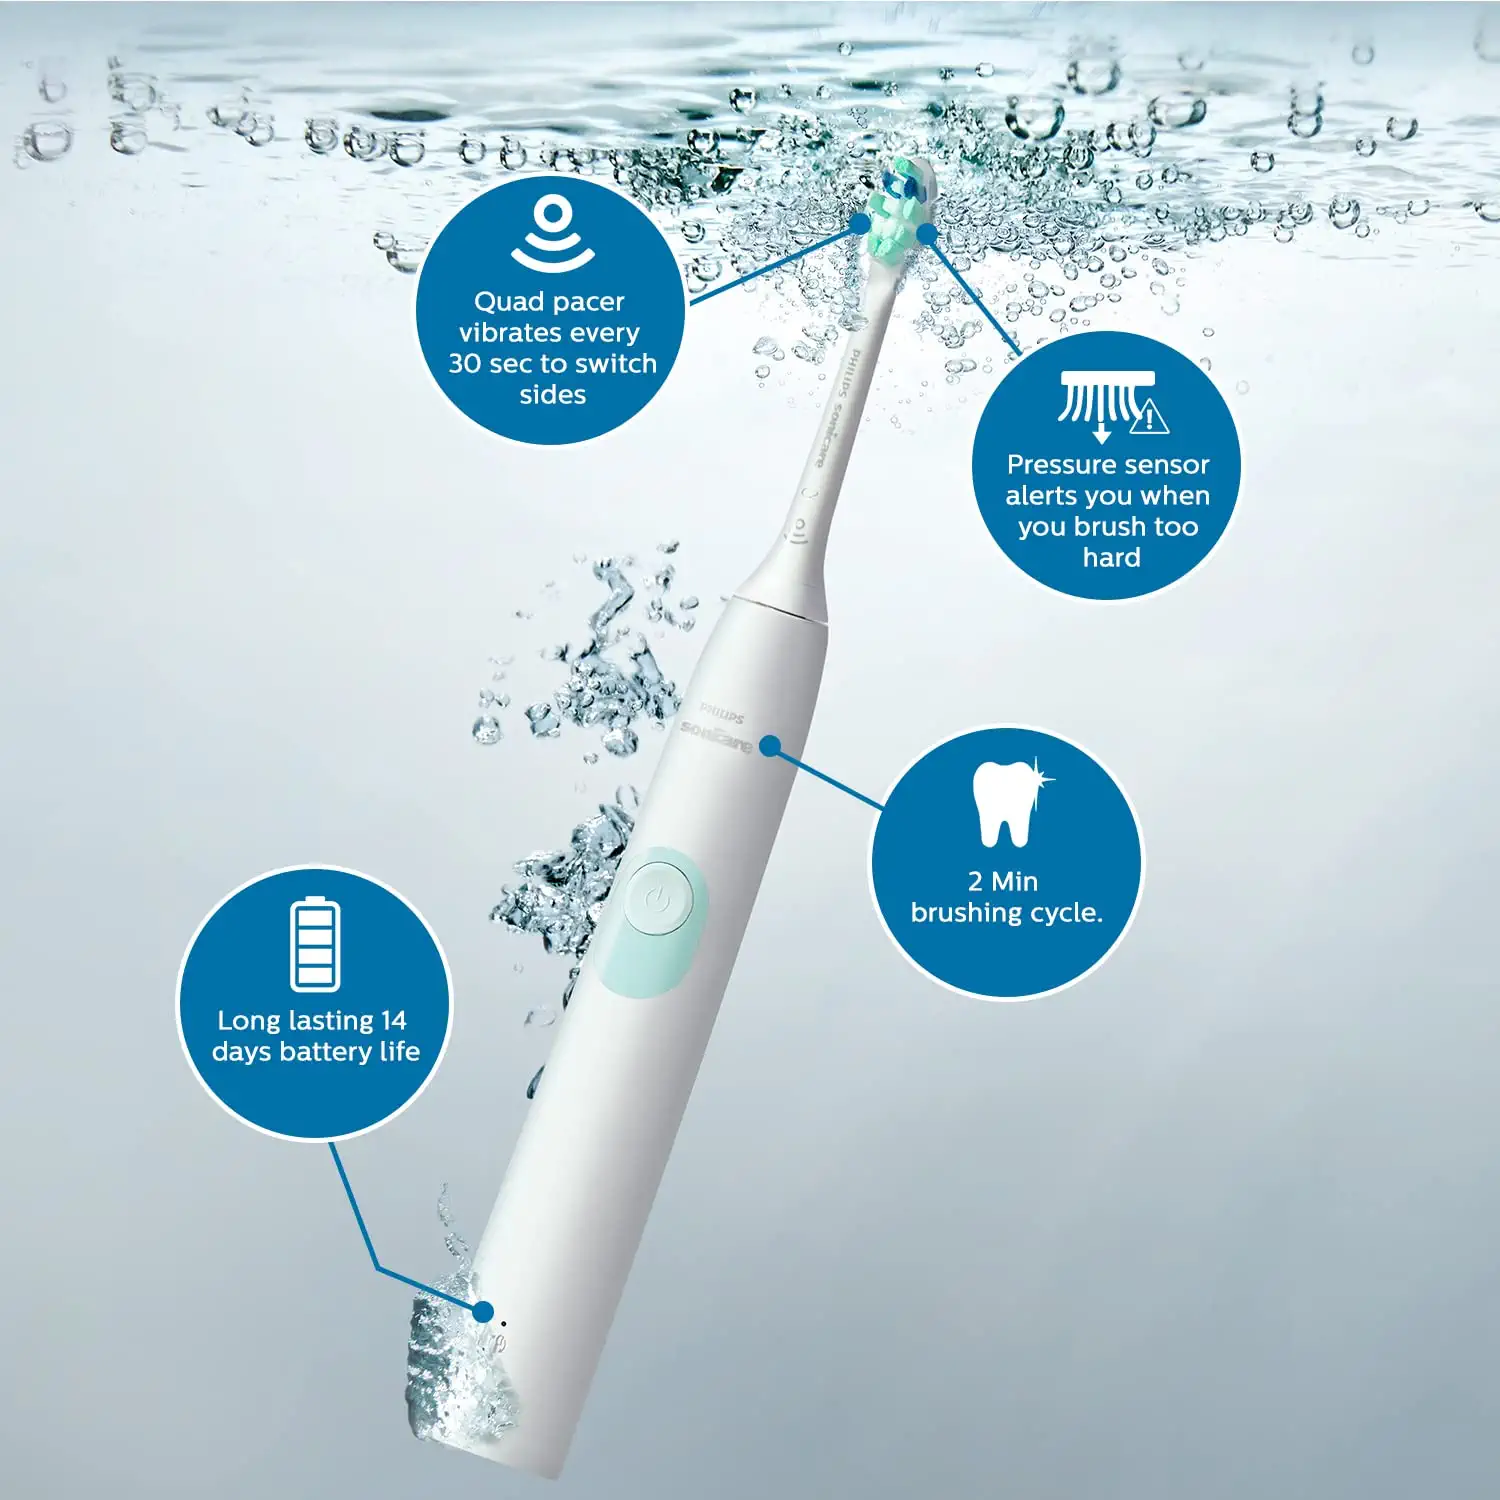 Philips HX680 Sonicare ProtectiveClean 4300 Electric Toothbrush with Sonic Technology, Up to 7x Plaque Removal, Built-in Pressure Sensor - Mahajan Electronics Online